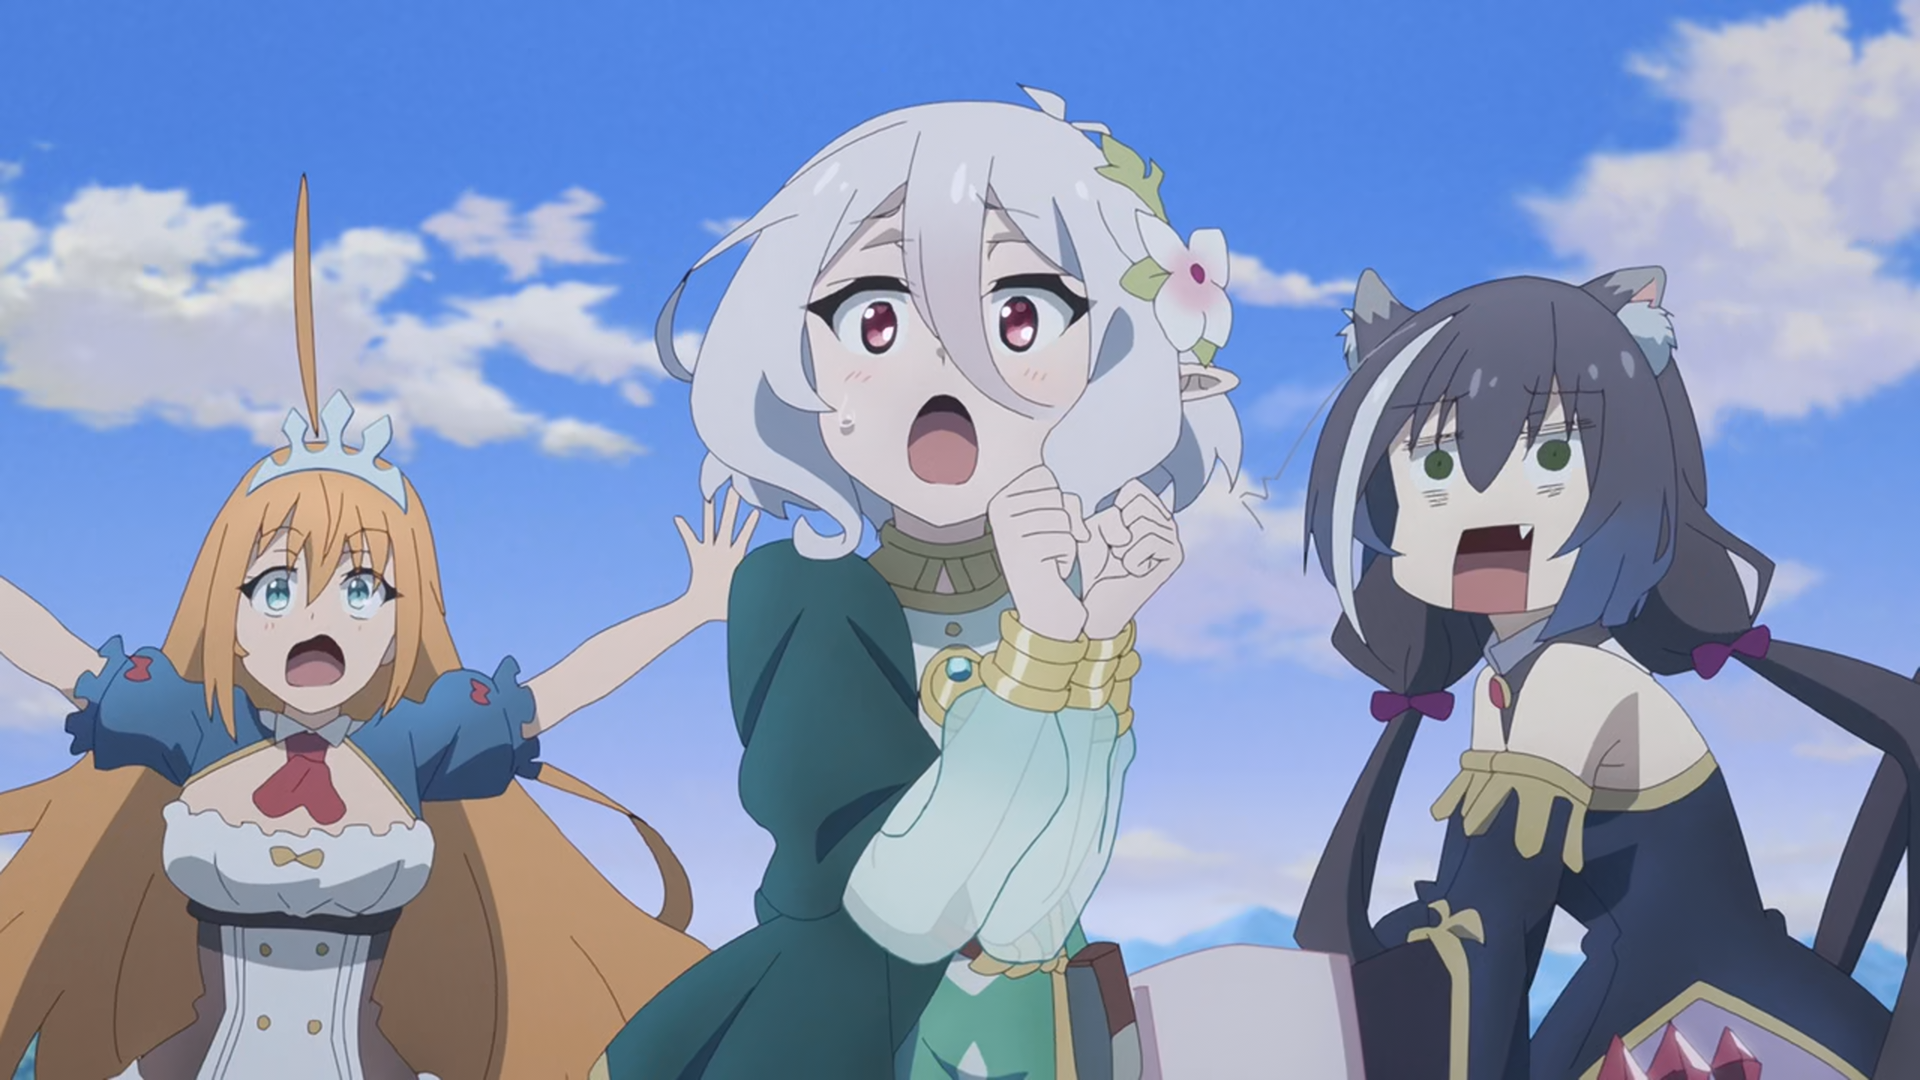 Crunchyroll - FEATURE: Meet the Stars of Princess Connect Re:Dive